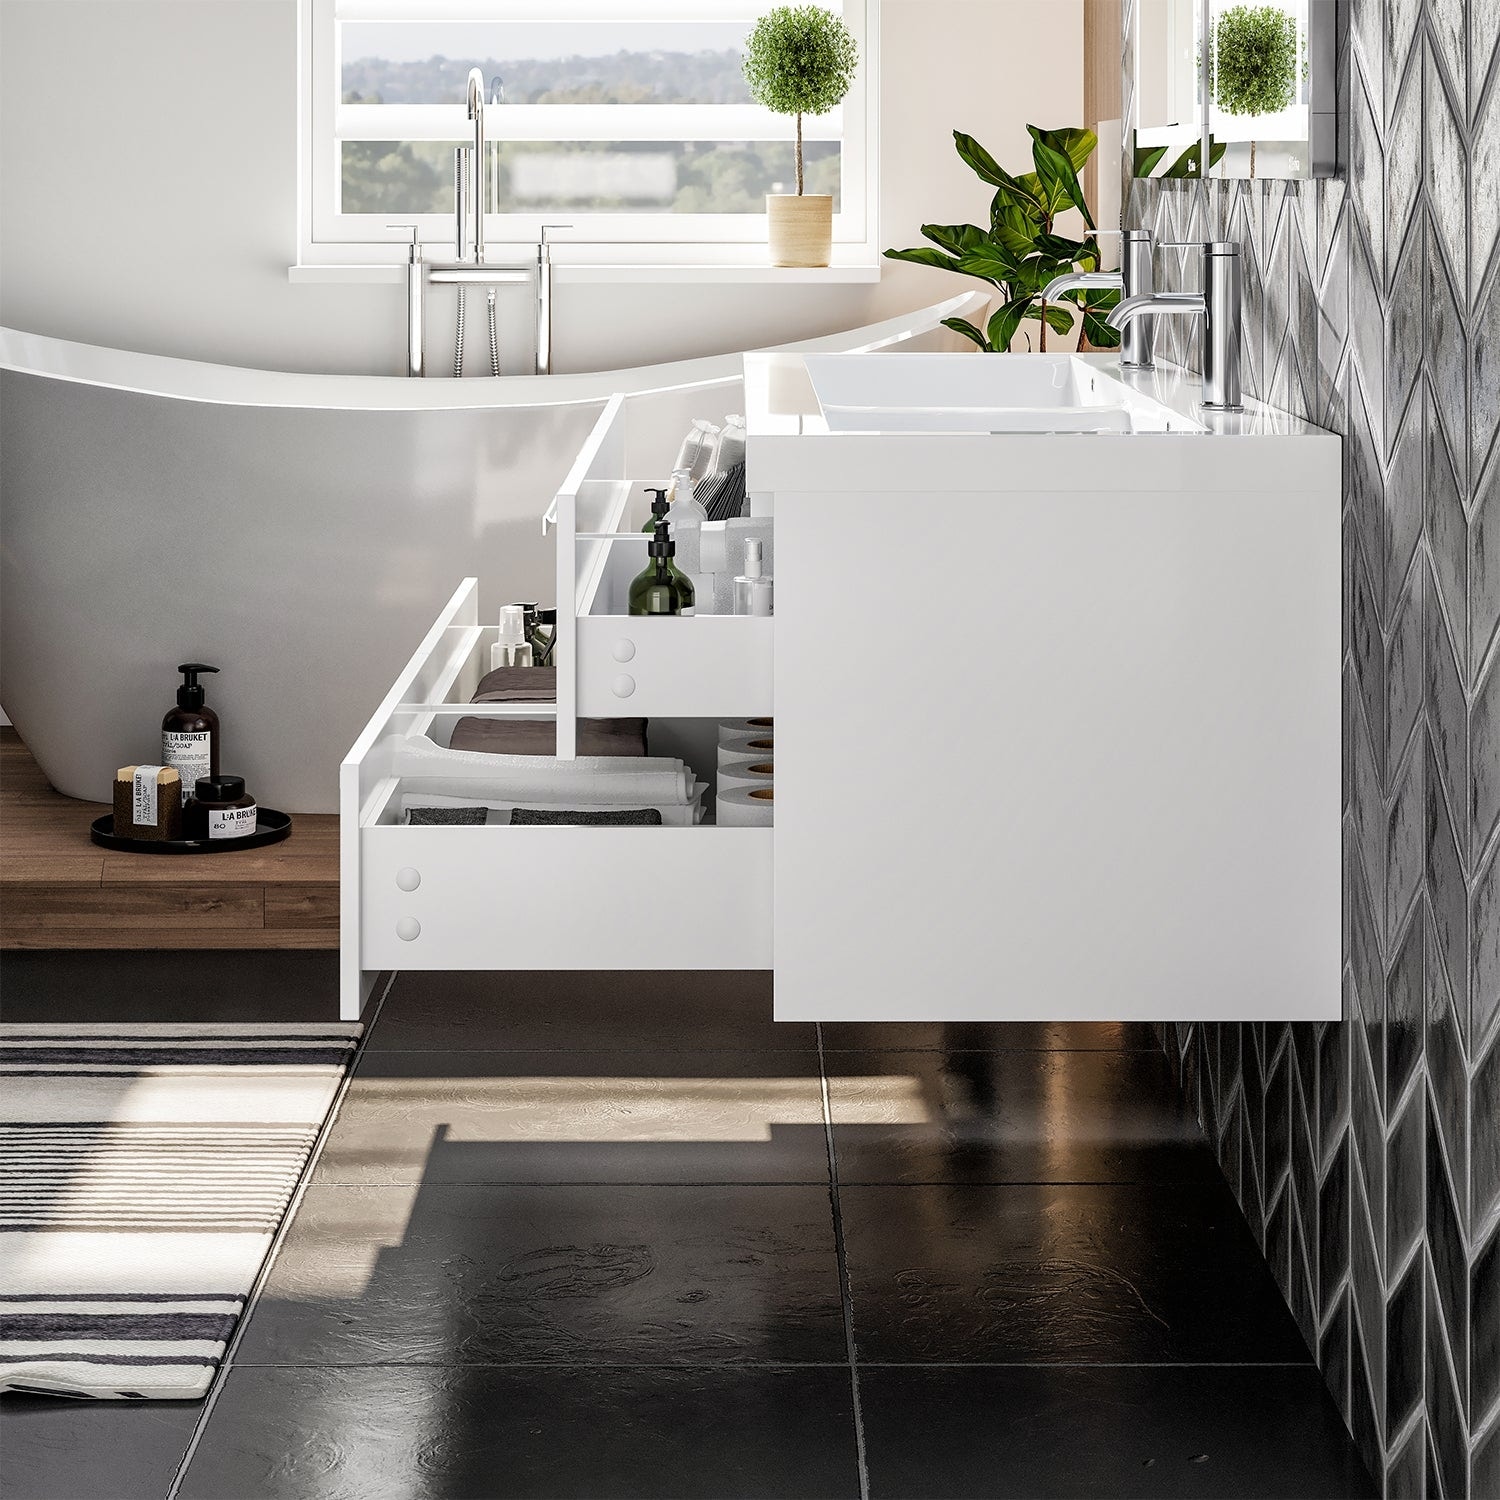 https://ak1.ostkcdn.com/images/products/is/images/direct/837c66f279f9b0a6340ba1d71e0fdd02ba7cda95/Eviva-Surf-57-inch-White-Modern-Bathroom-Vanity-Set-with-Integrated-White-Acrylic-Double-Sink.jpg